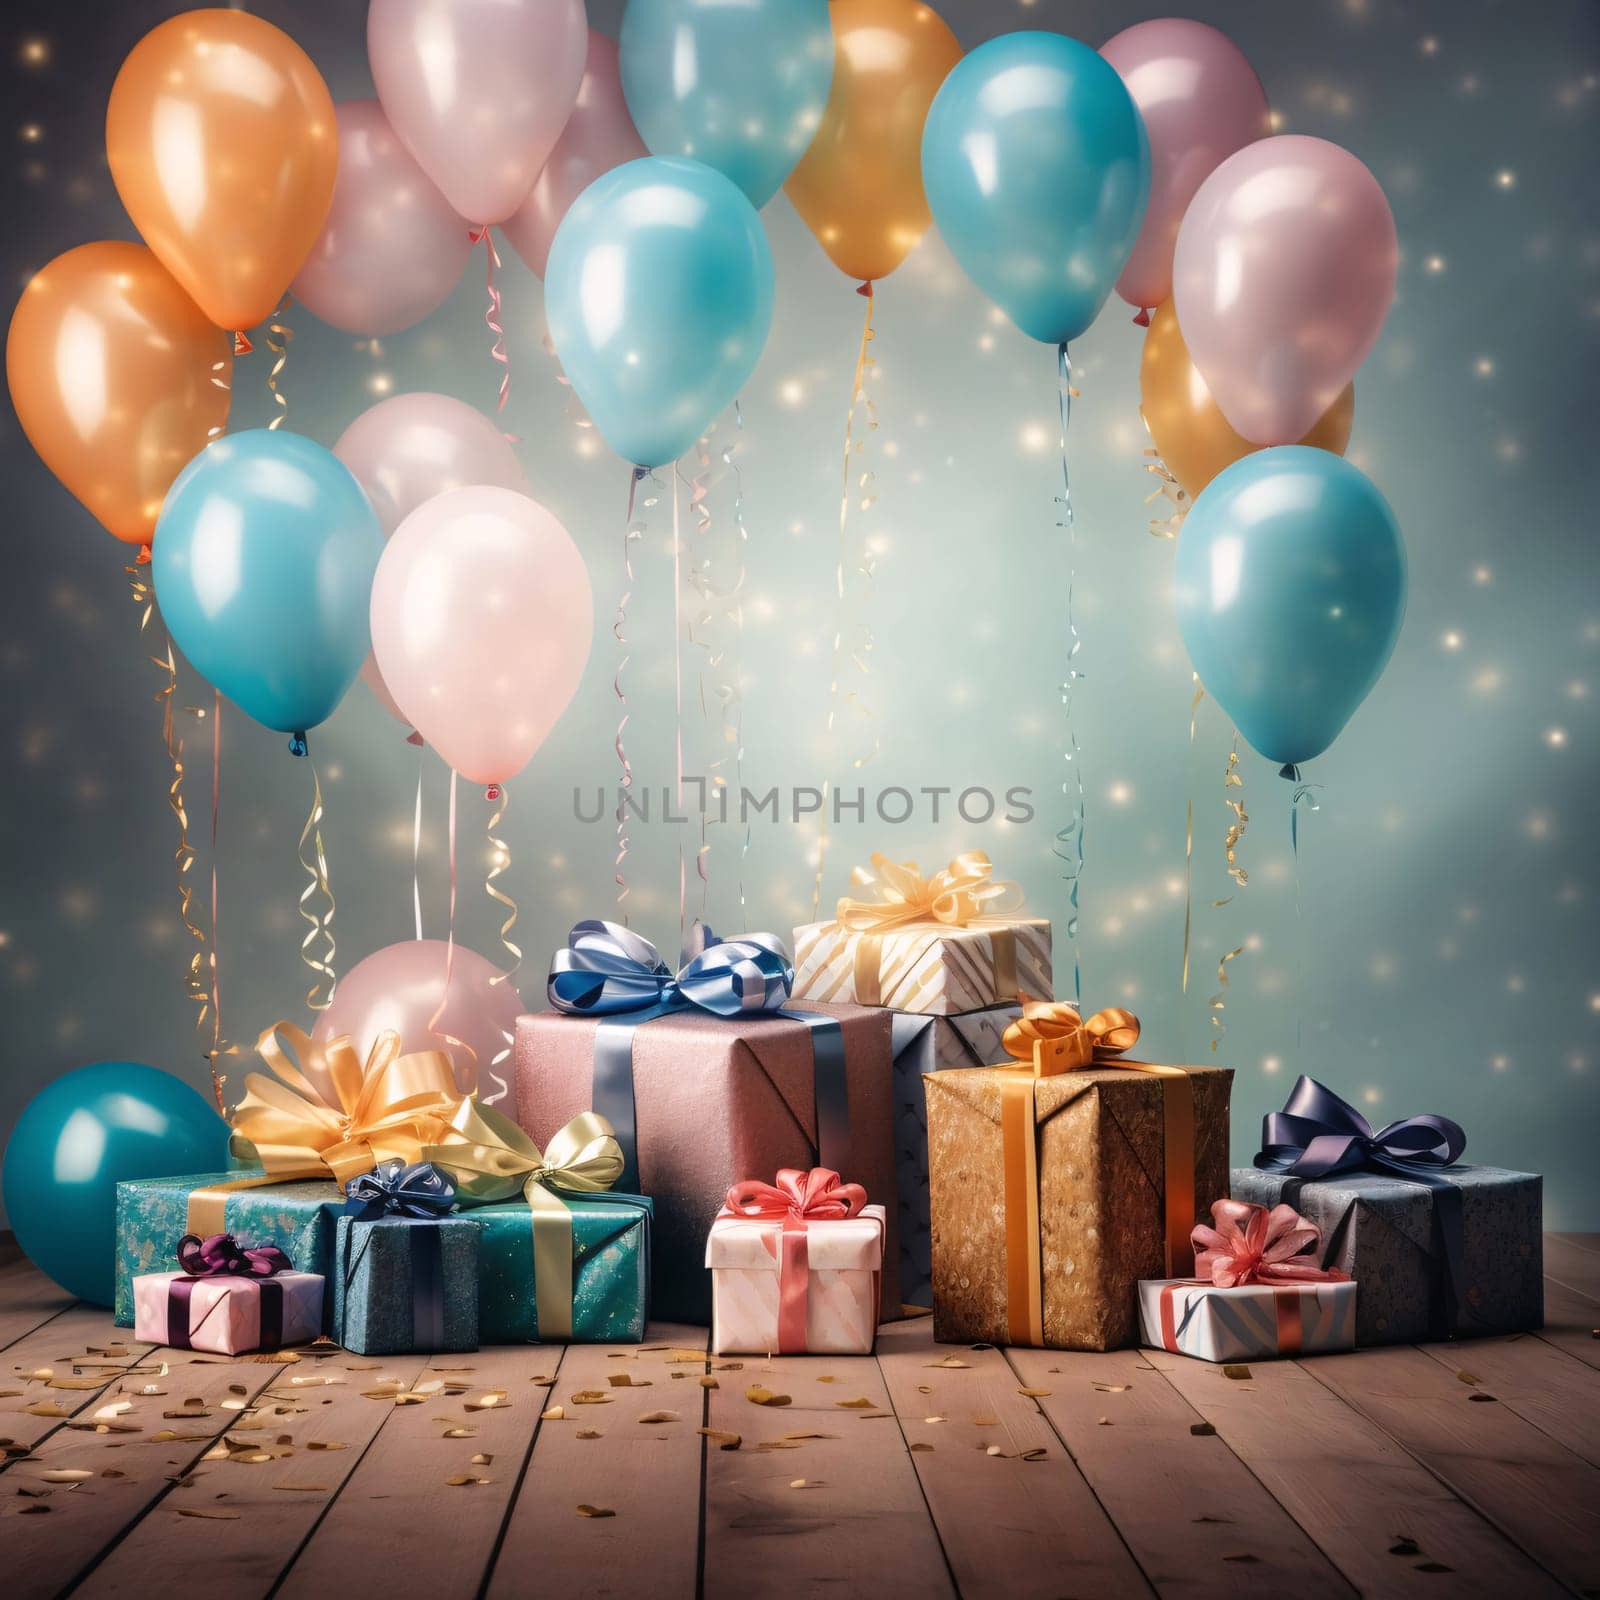 Many colorful gifts with bows, colorful rainbow balloons, blurred background.Valentine's Day banner with space for your own content. by ThemesS